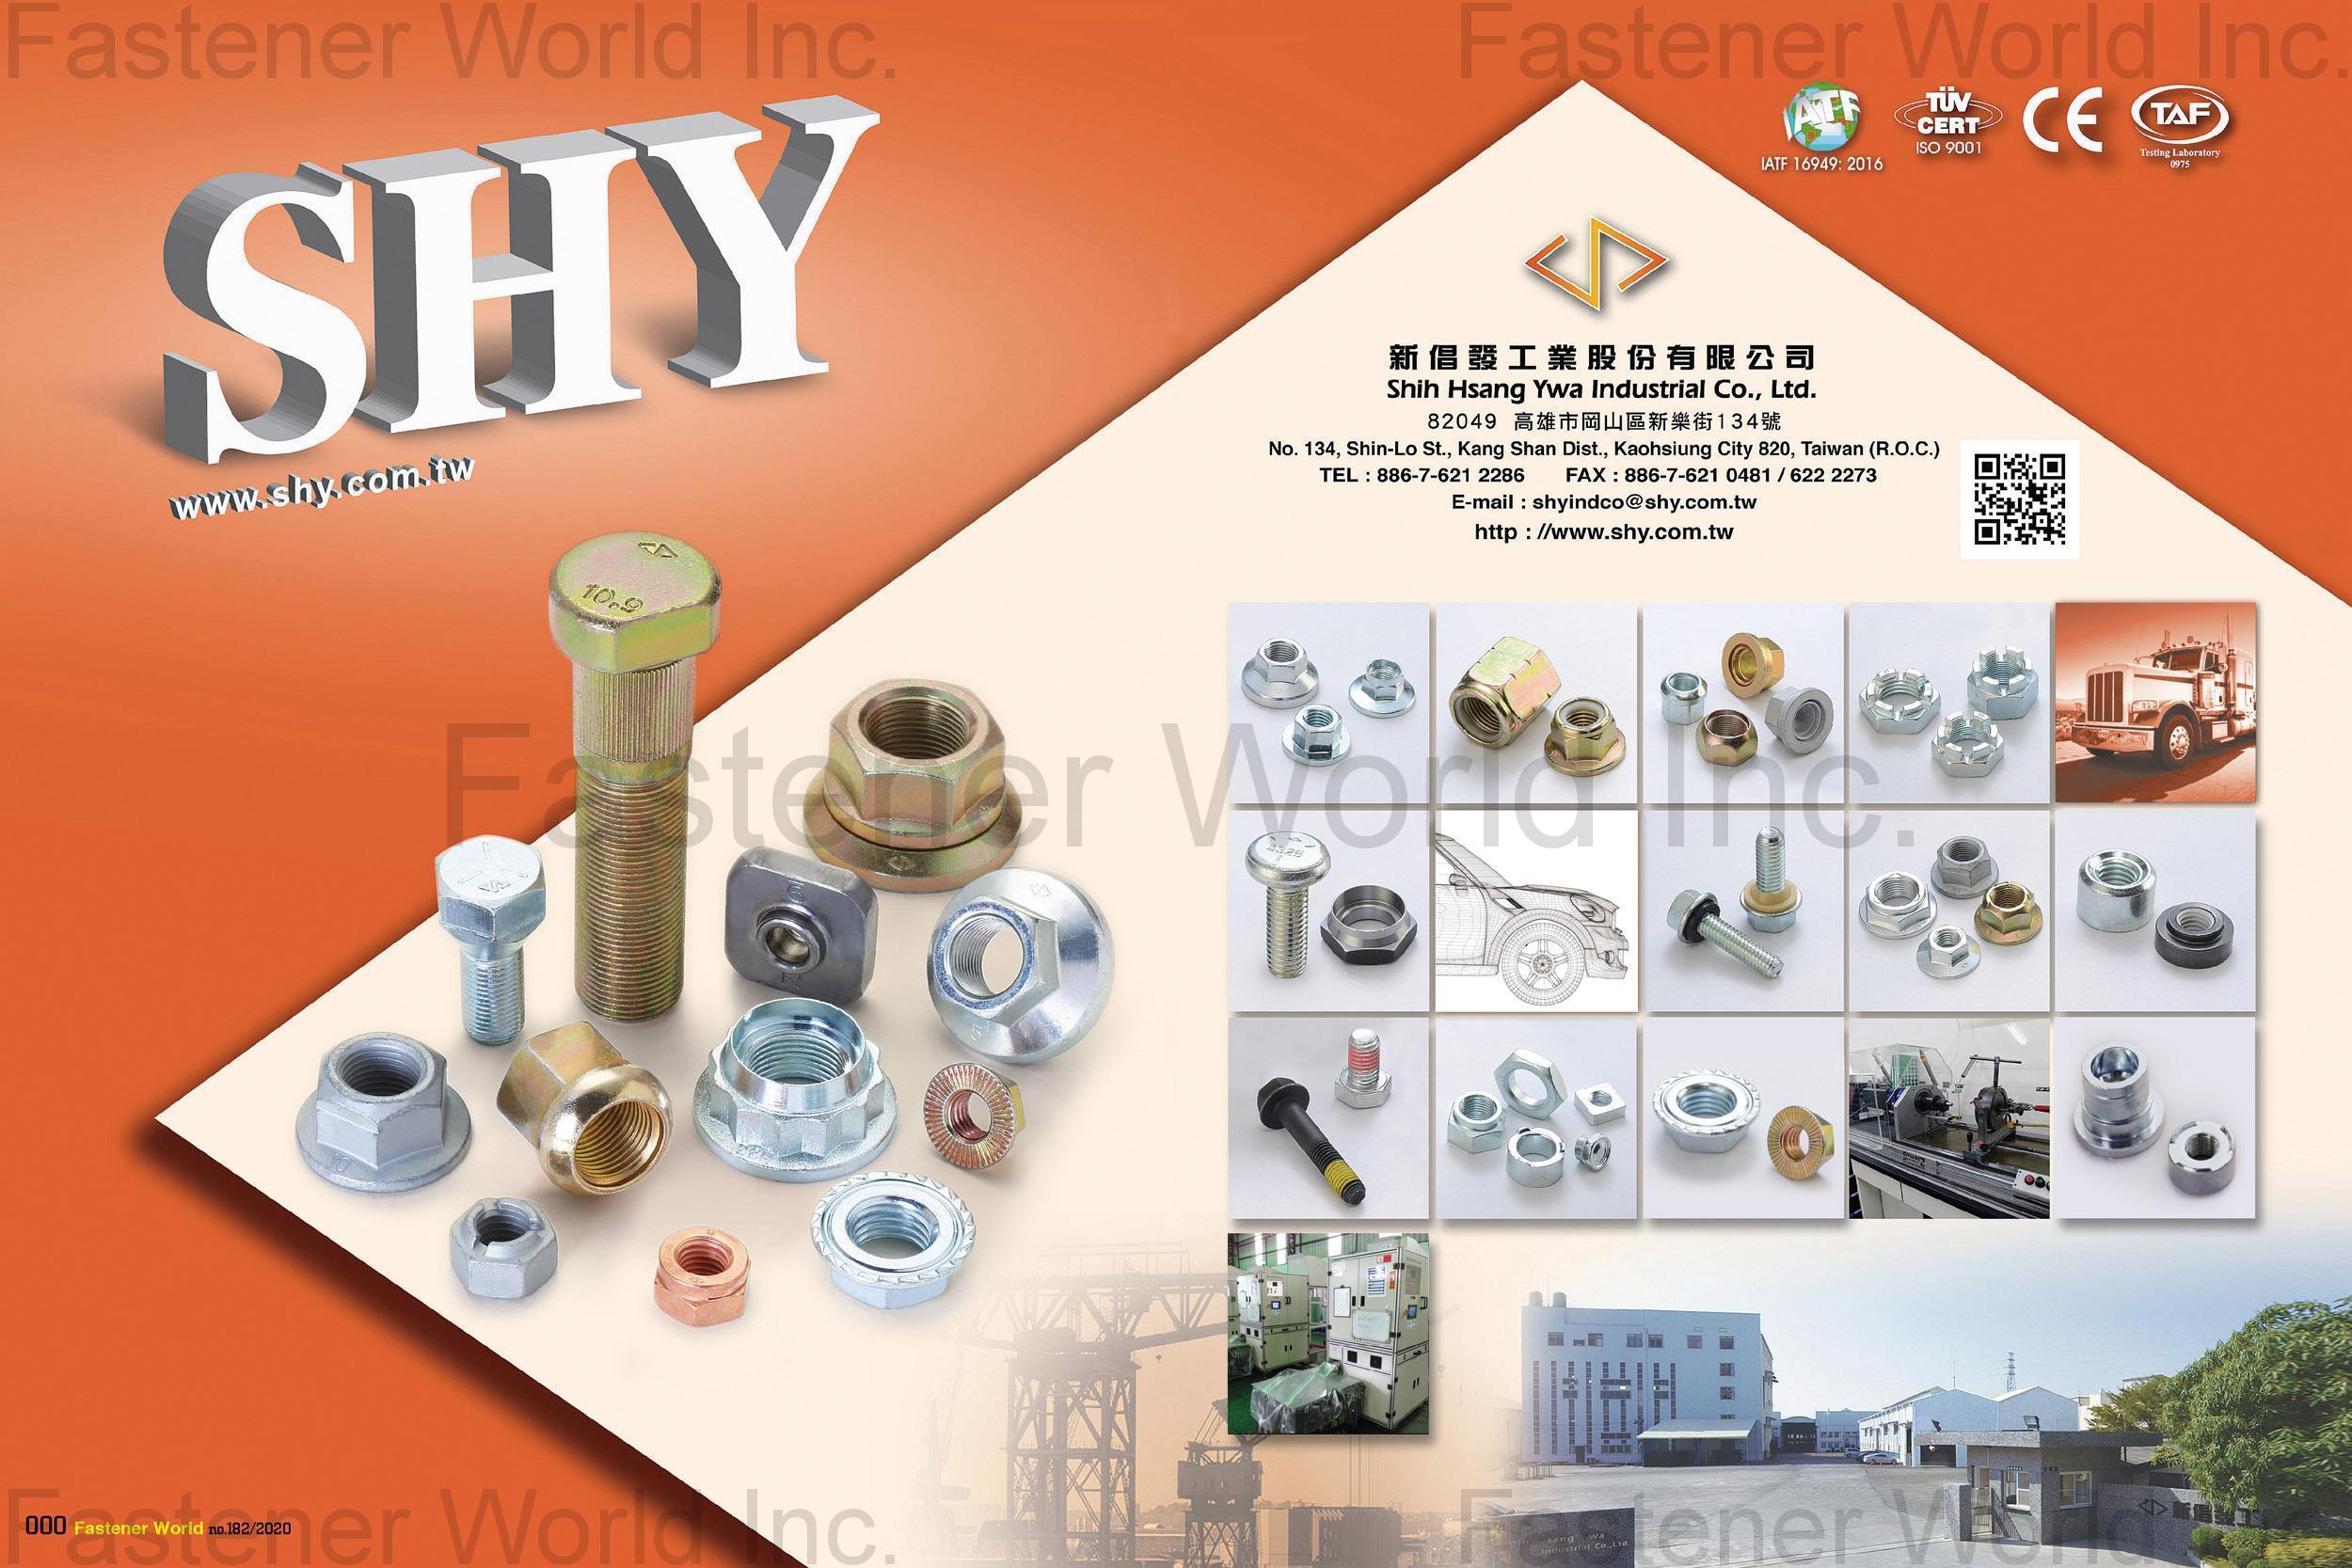 SHIH HSANG YWA INDUSTRIAL CO., LTD.  , Nylon & Nylon Flange Nuts, Hot Forming Products, Flange , Flange Nuts